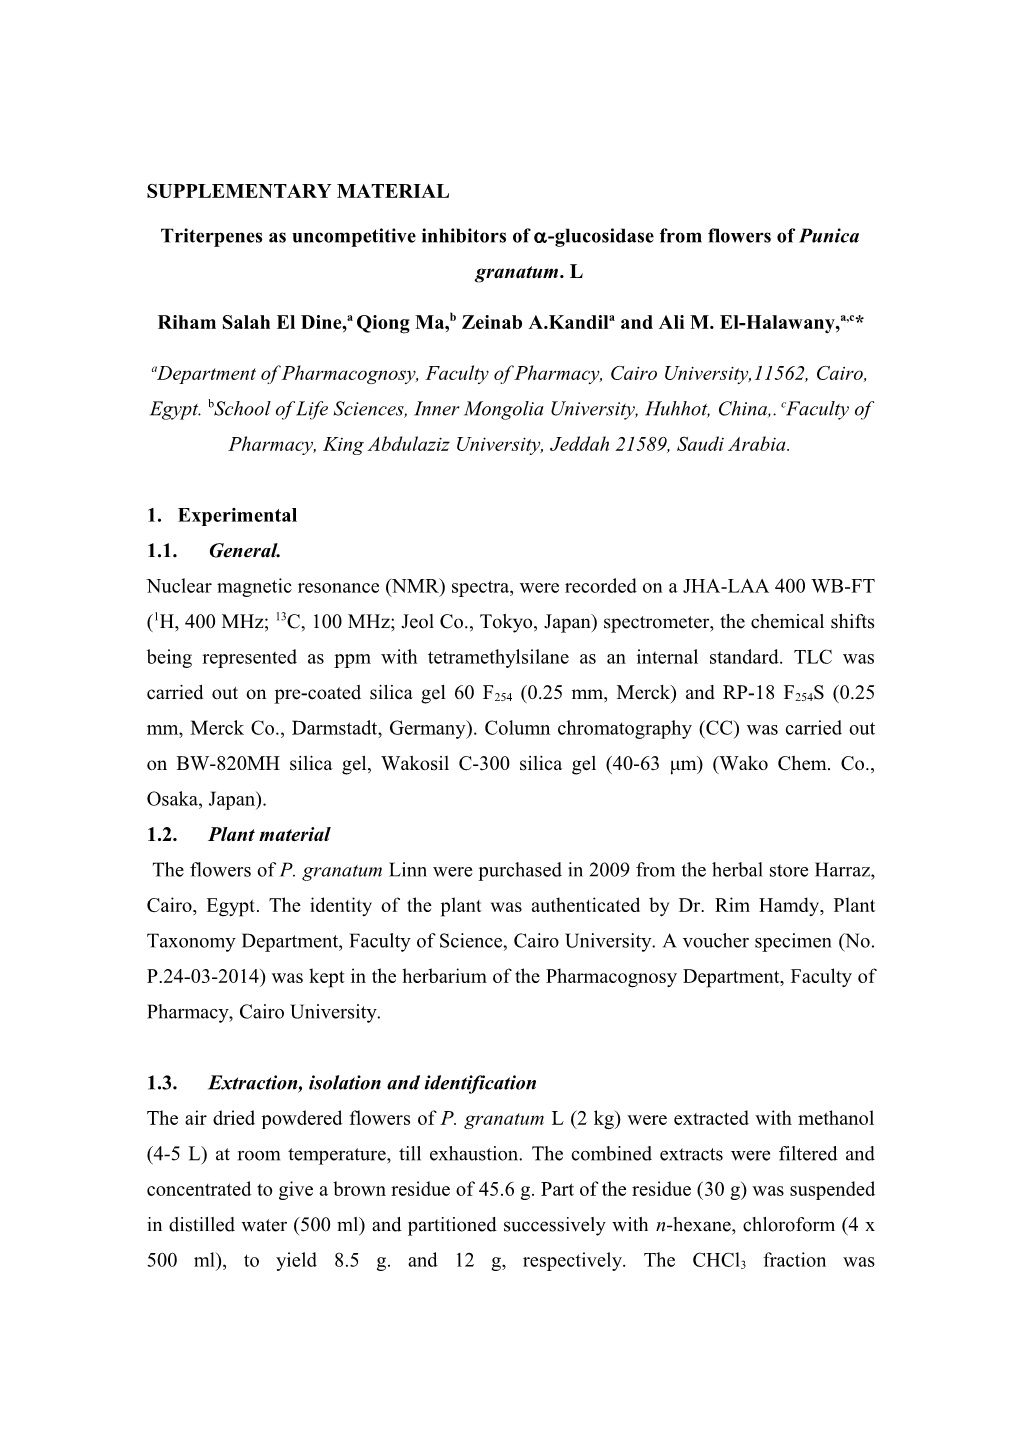 Triterpenes As Uncompetitive Inhibitors of -Glucosidase from Flowers of Punicagranatum. L